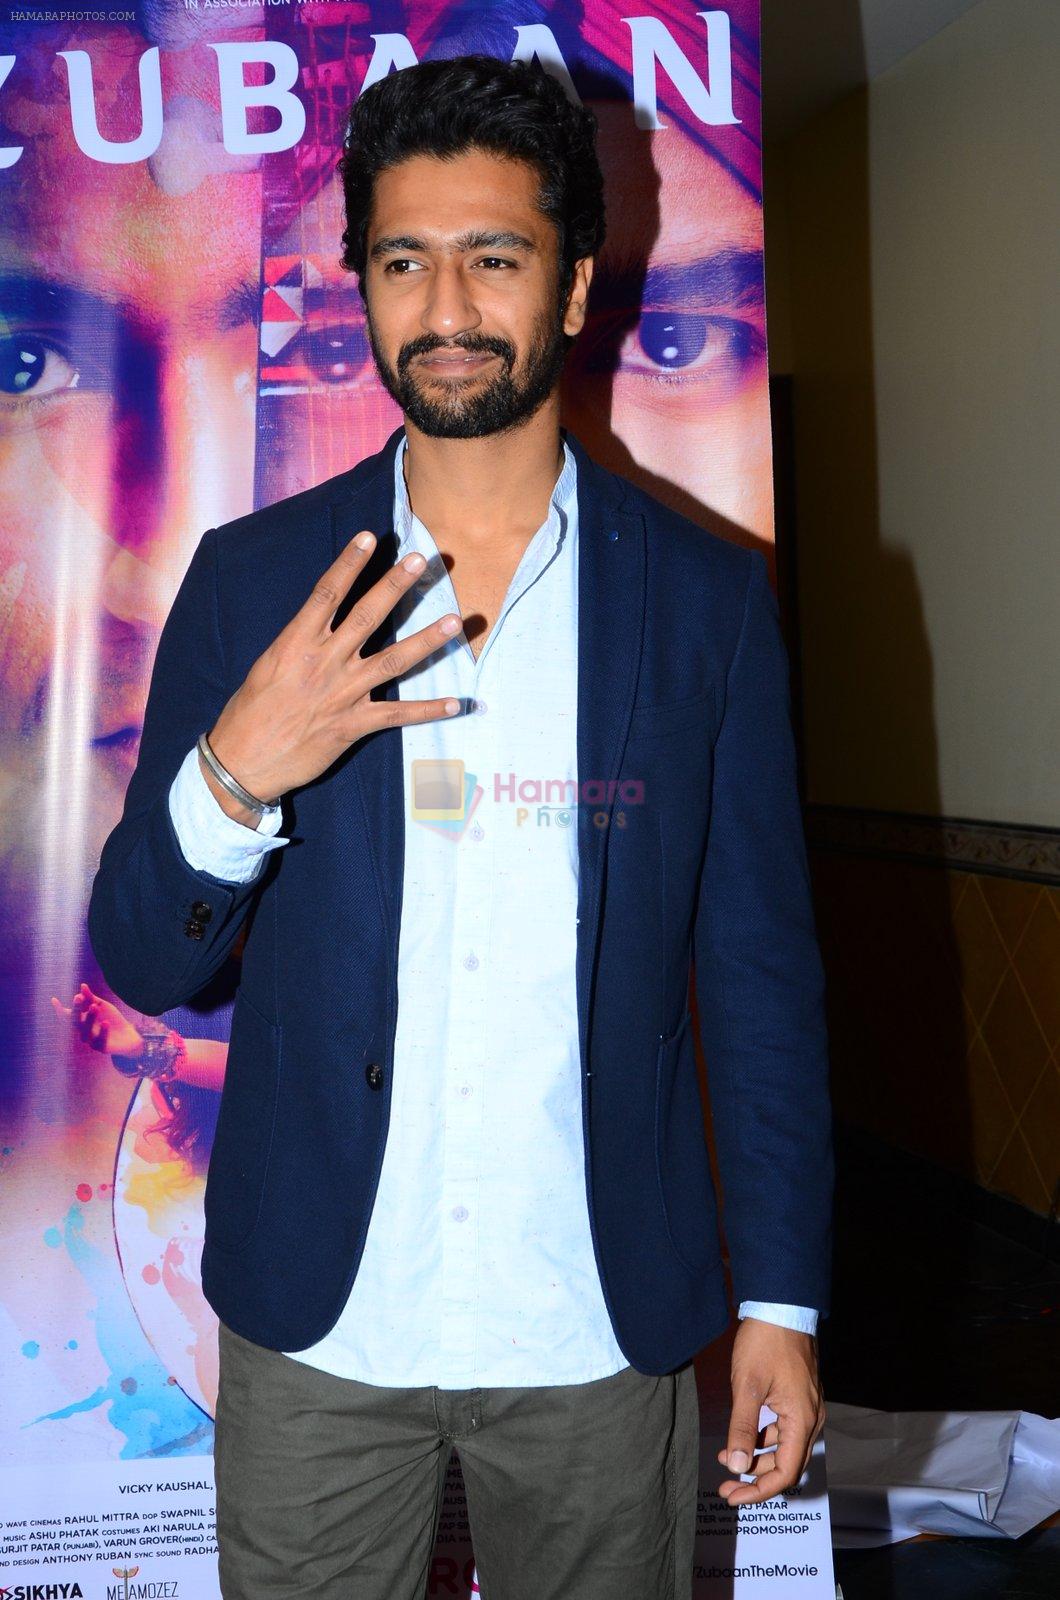 Vicky Kaushal at Zubaan promotions in Mumbai on 14th Feb 2016